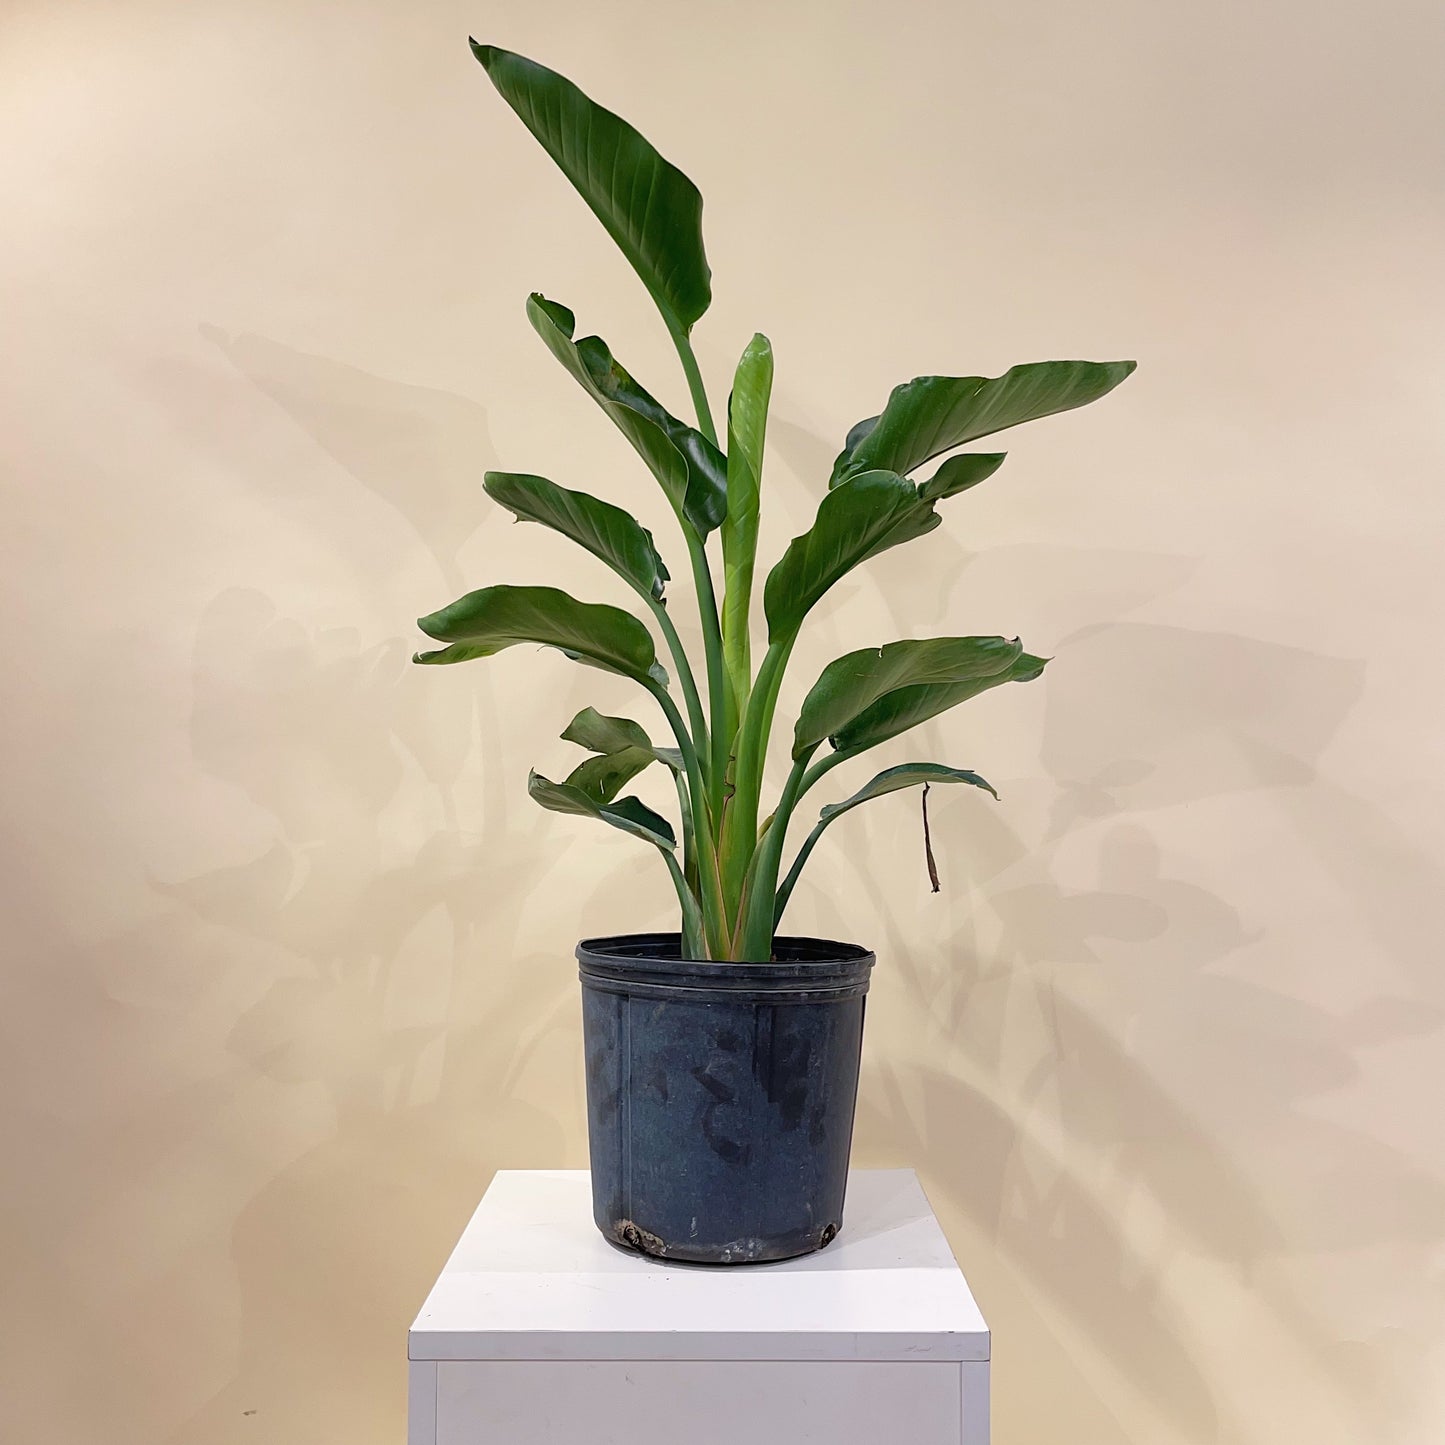 White Bird of Paradise (Strelitzia nicolai) in a 10 inch pot. Indoor plant for sale by Promise Supply for delivery and pickup in Toronto